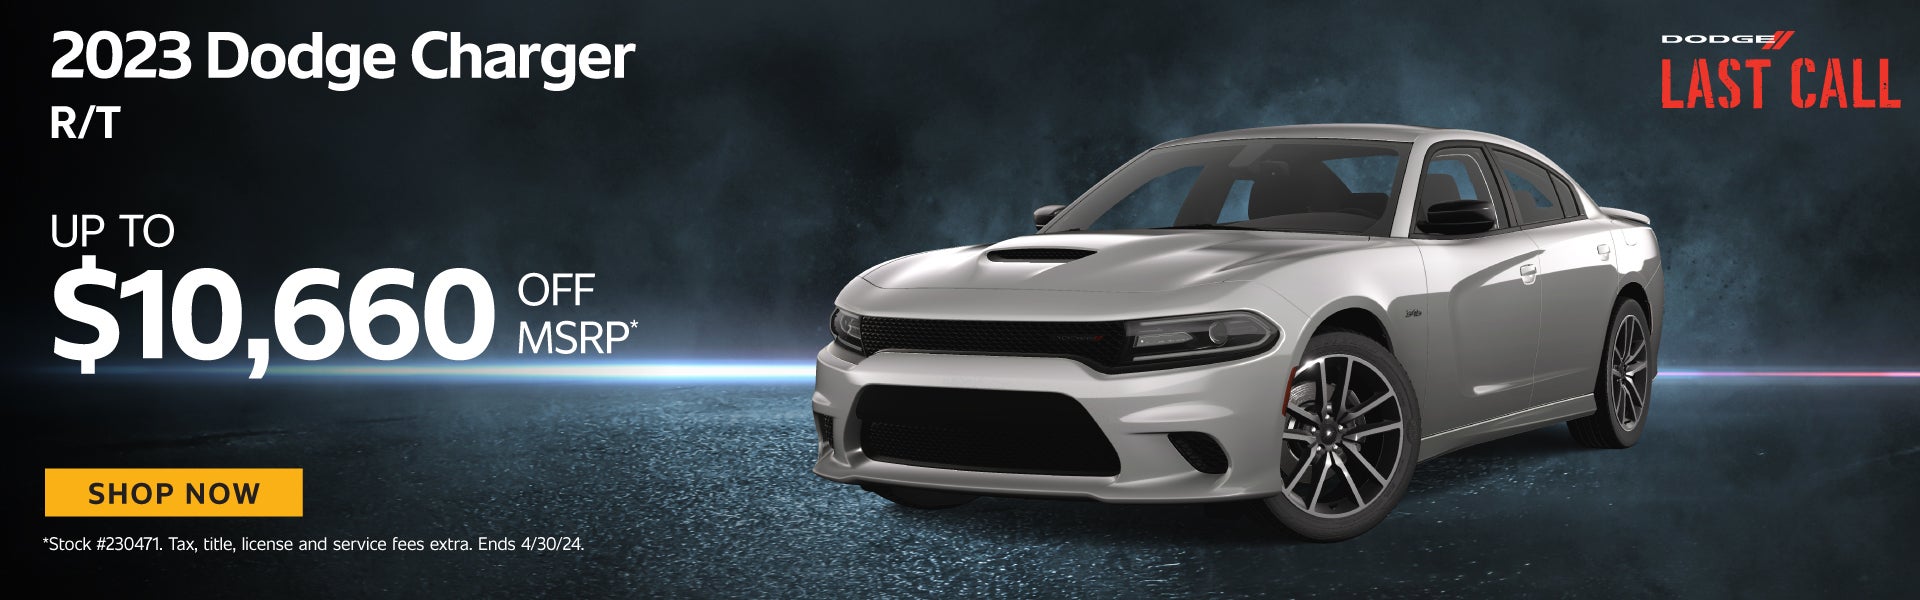 2023 Dodge CHARGER